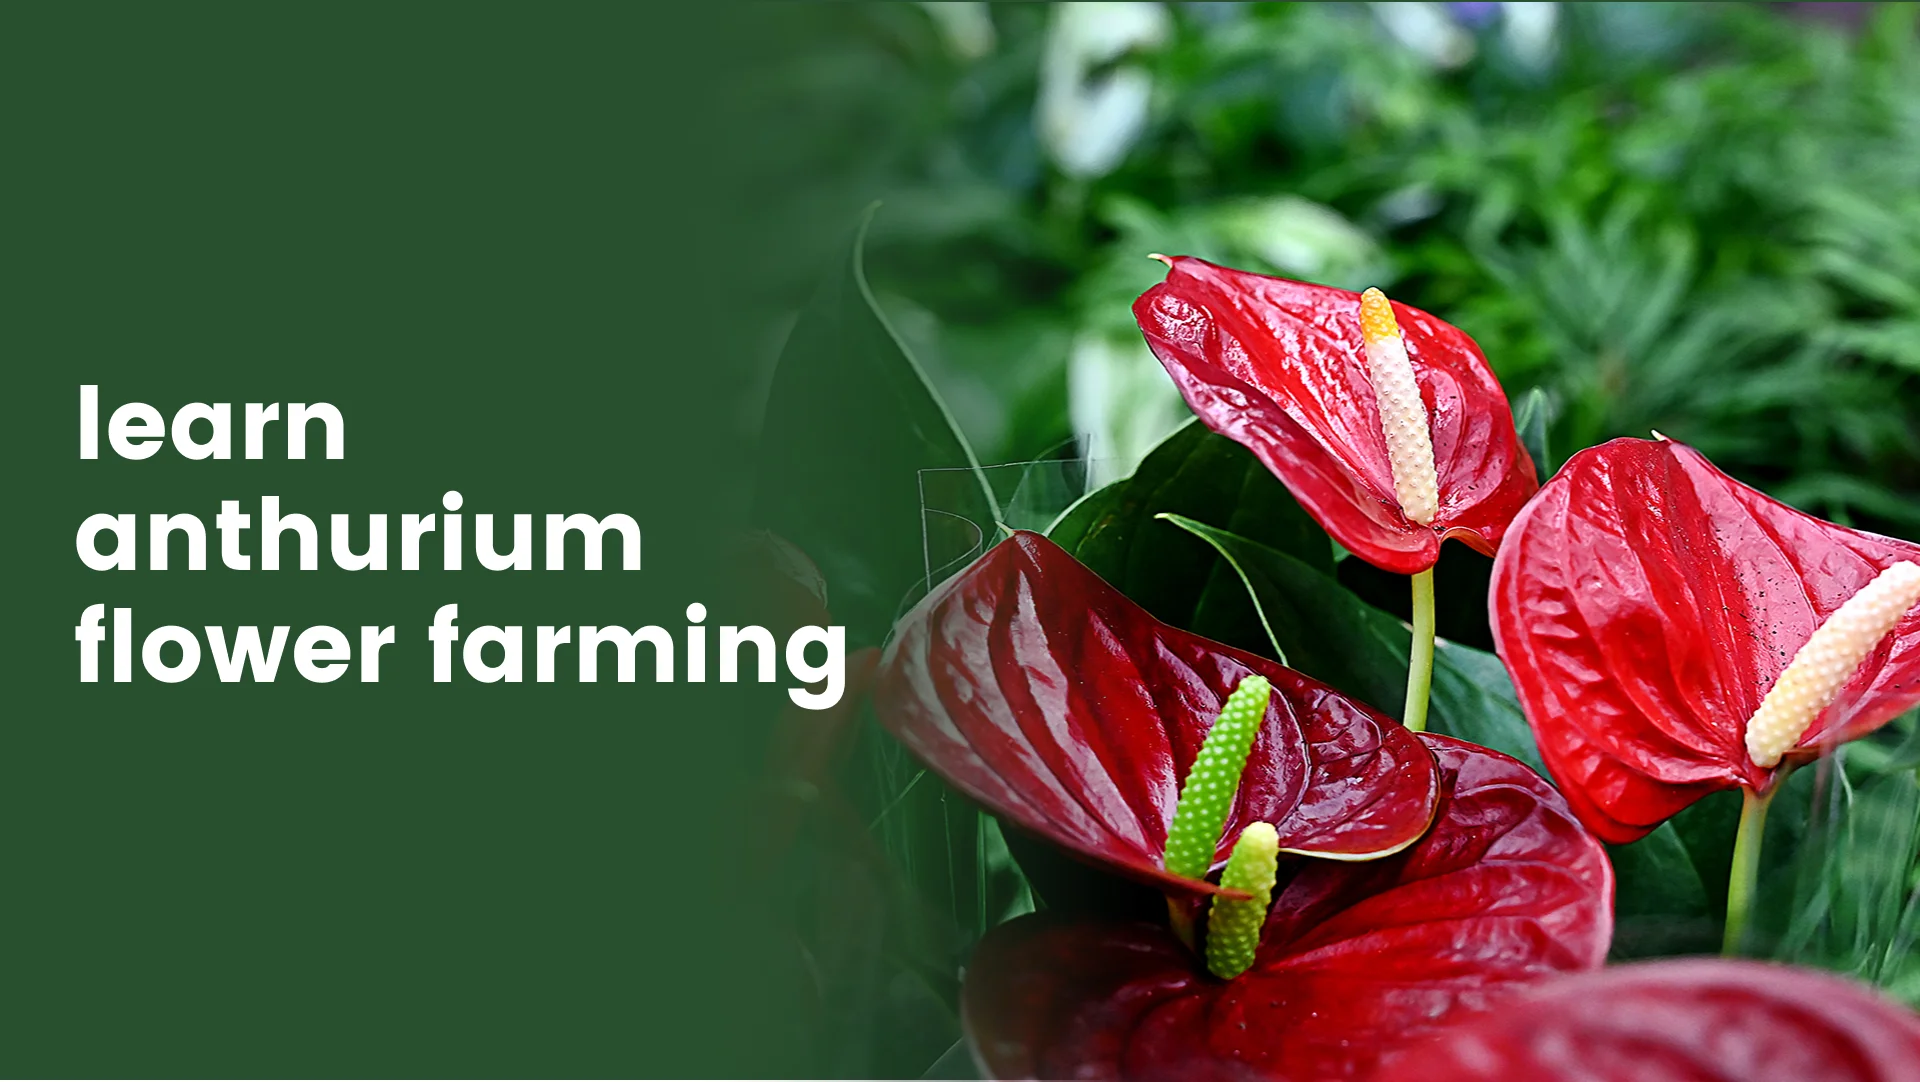 Course Trailer: Anthurium Farming Course - Earn Rs 30/flower. Watch to know more.